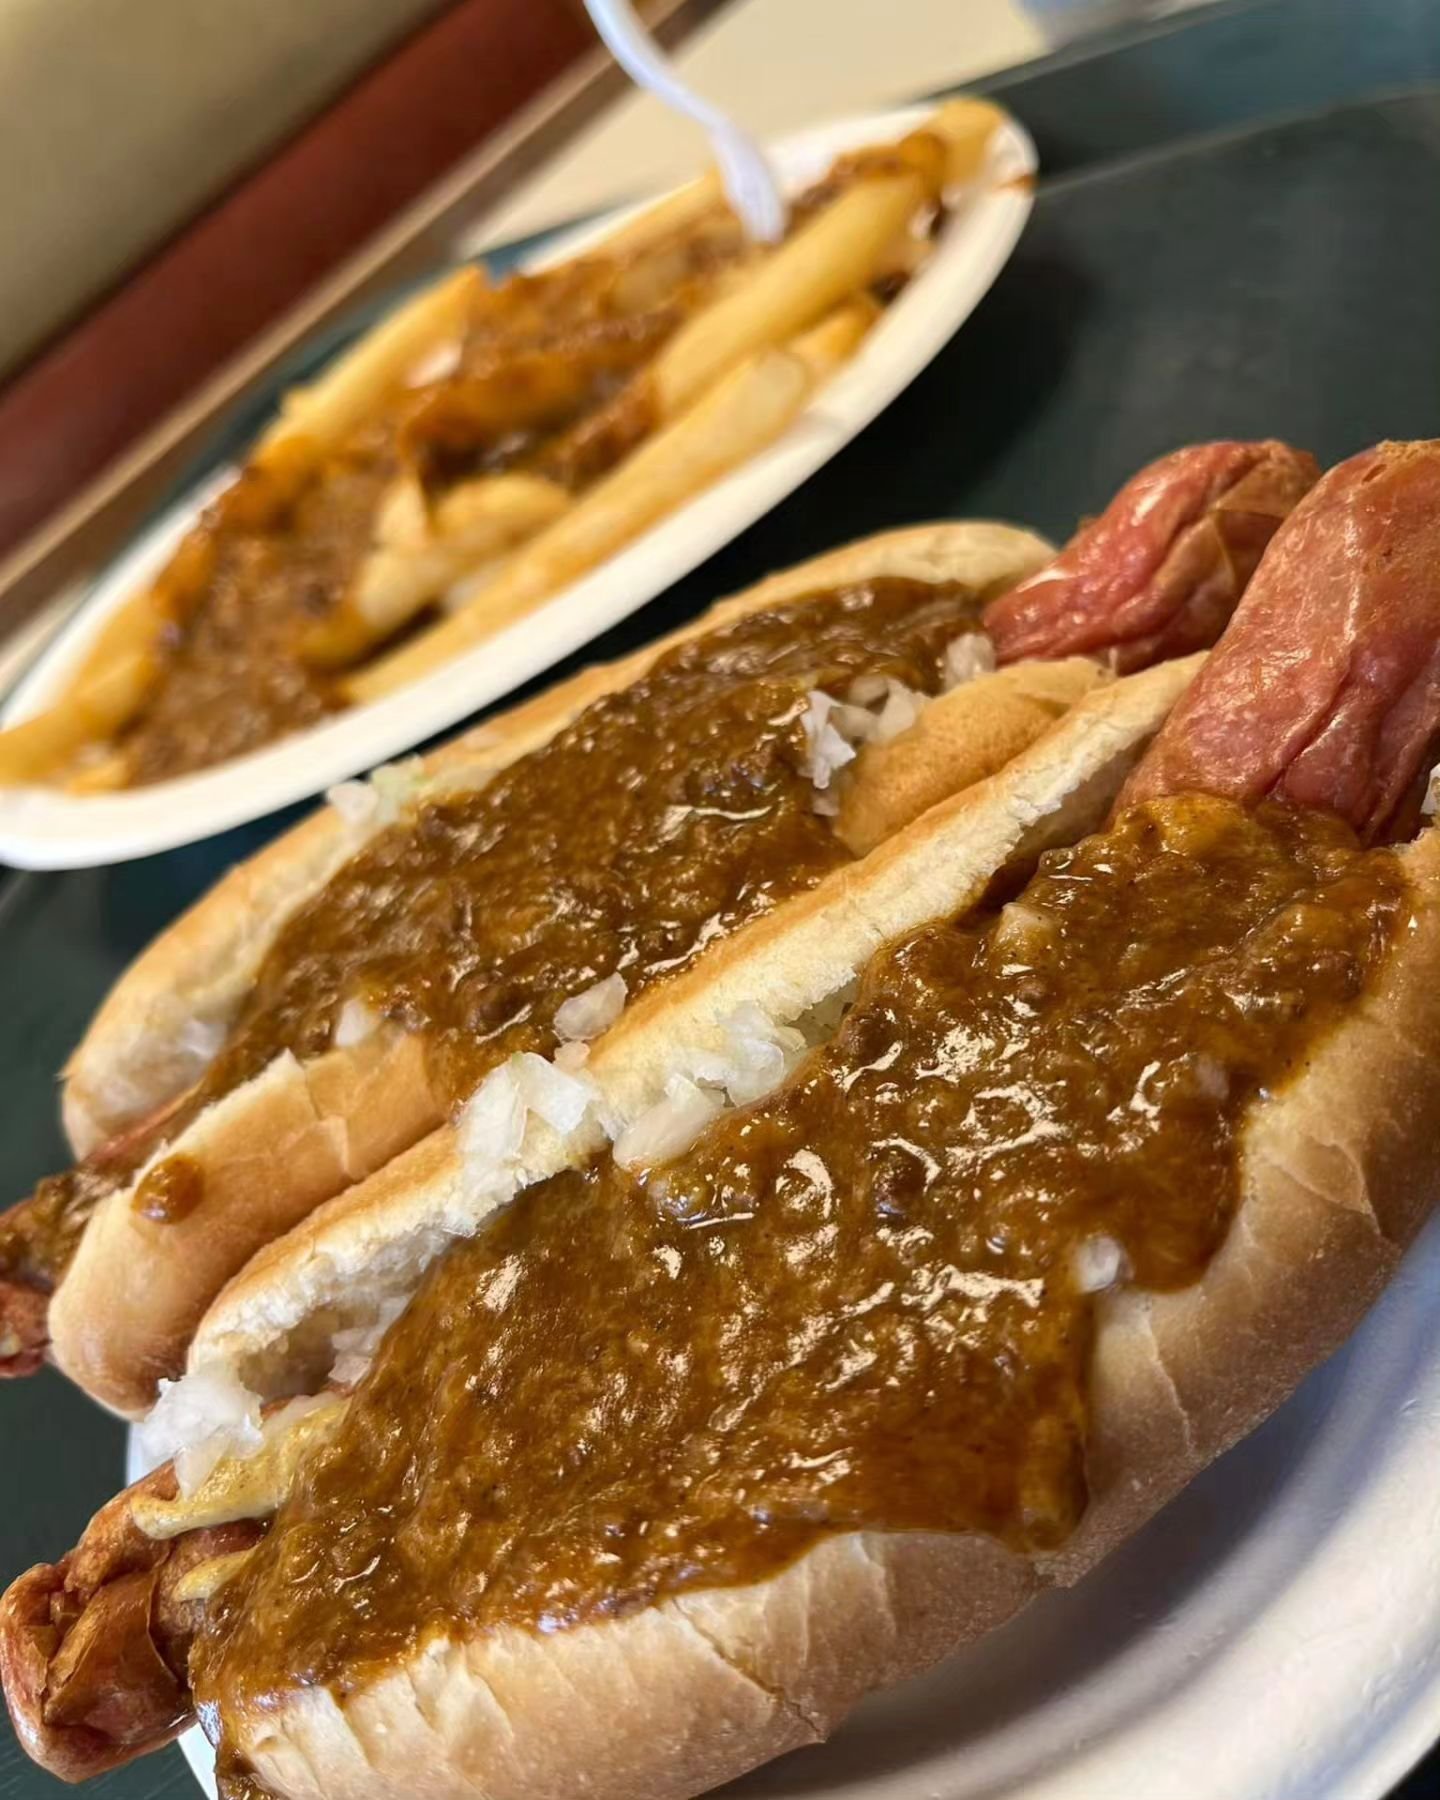 Thanks for stopping by The Hot Grill, Milan! 
That's our favorite kinda lunch. 🤩🌭🌭

@thehotgrillofficial #thehotgrillclifton #669lexingtonave ##cliftonnj ##worldstastiesttexasweiners 

Lunch
Reposted from @milan_lonnie_galovic